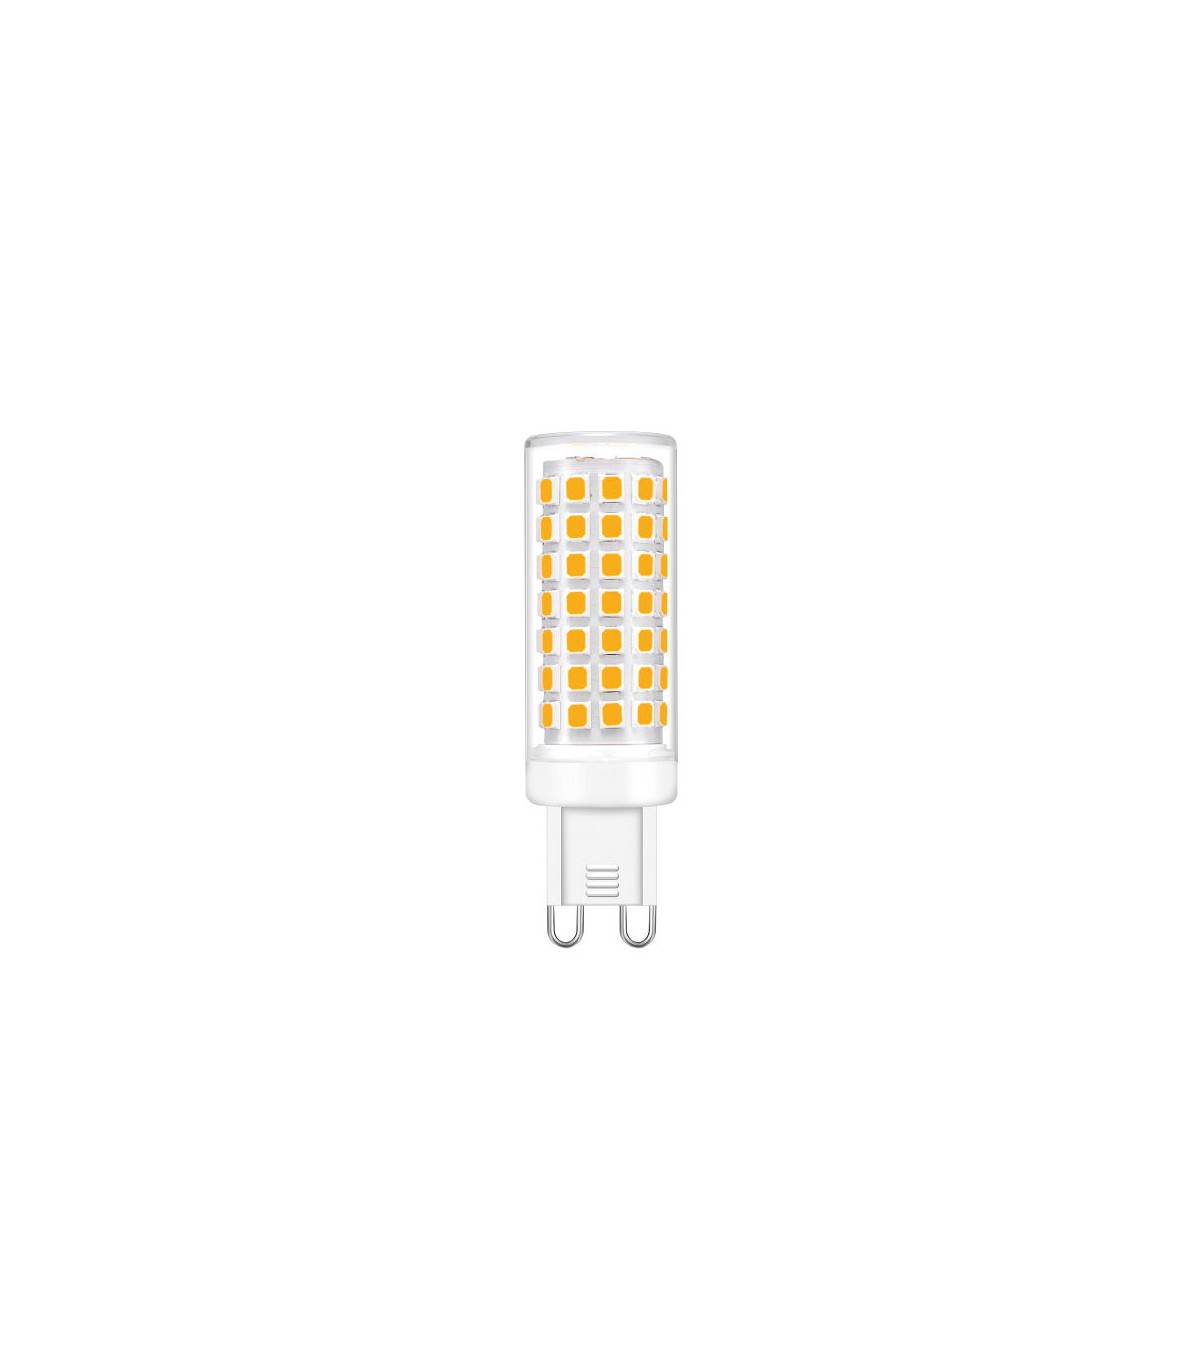 ARIC 20104  Ampoule LED G4 4W variable - Blanc Chaud